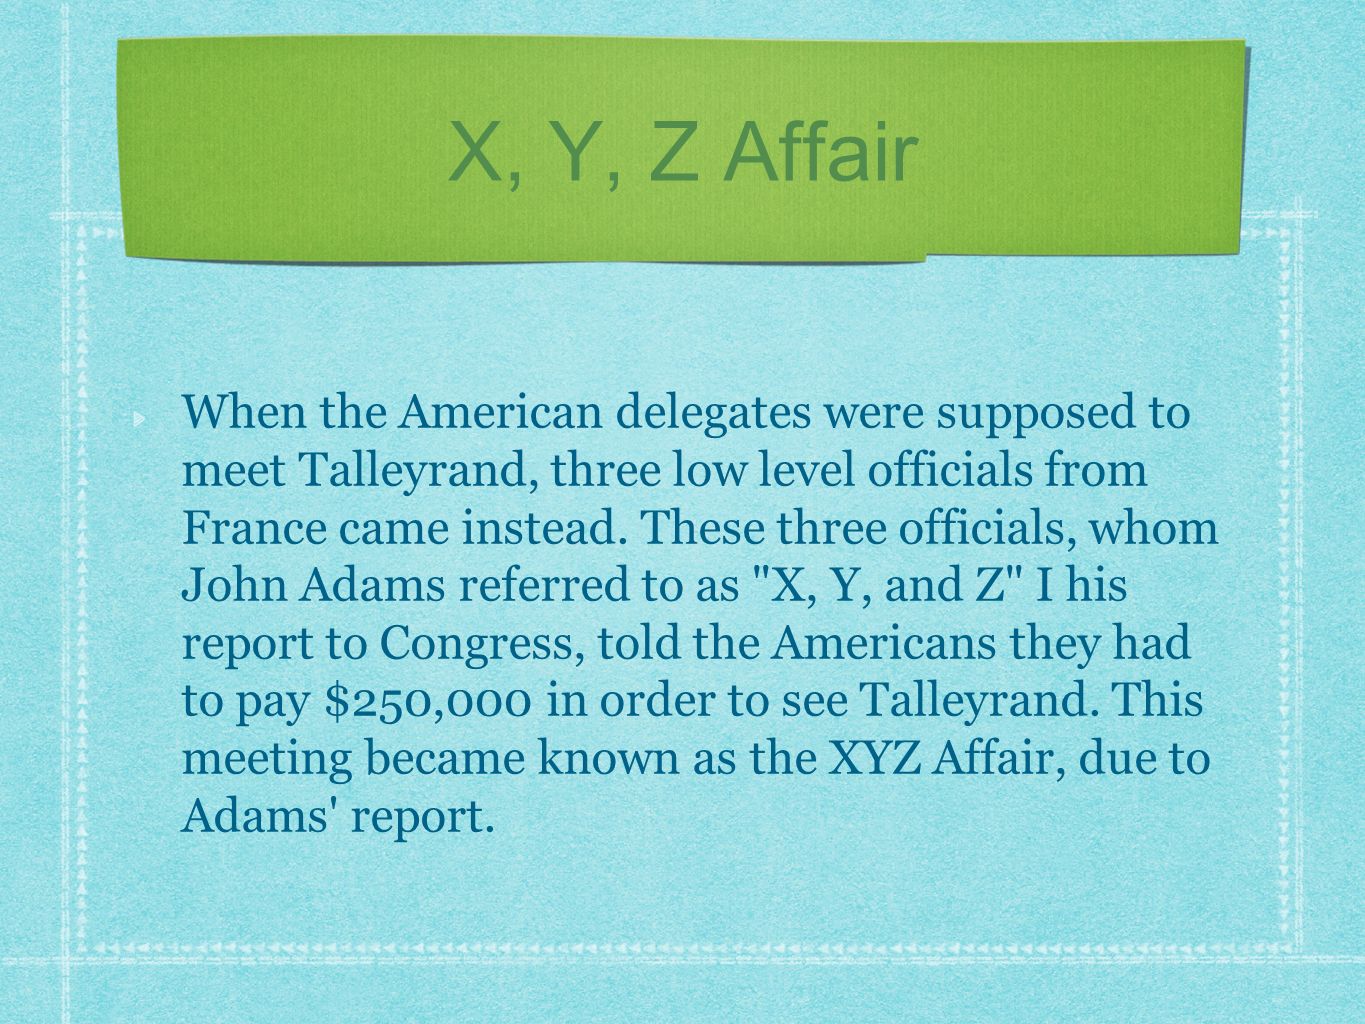 X, Y, Z Affair When the American delegates were supposed to meet Talleyrand, three low level officials from France came instead.